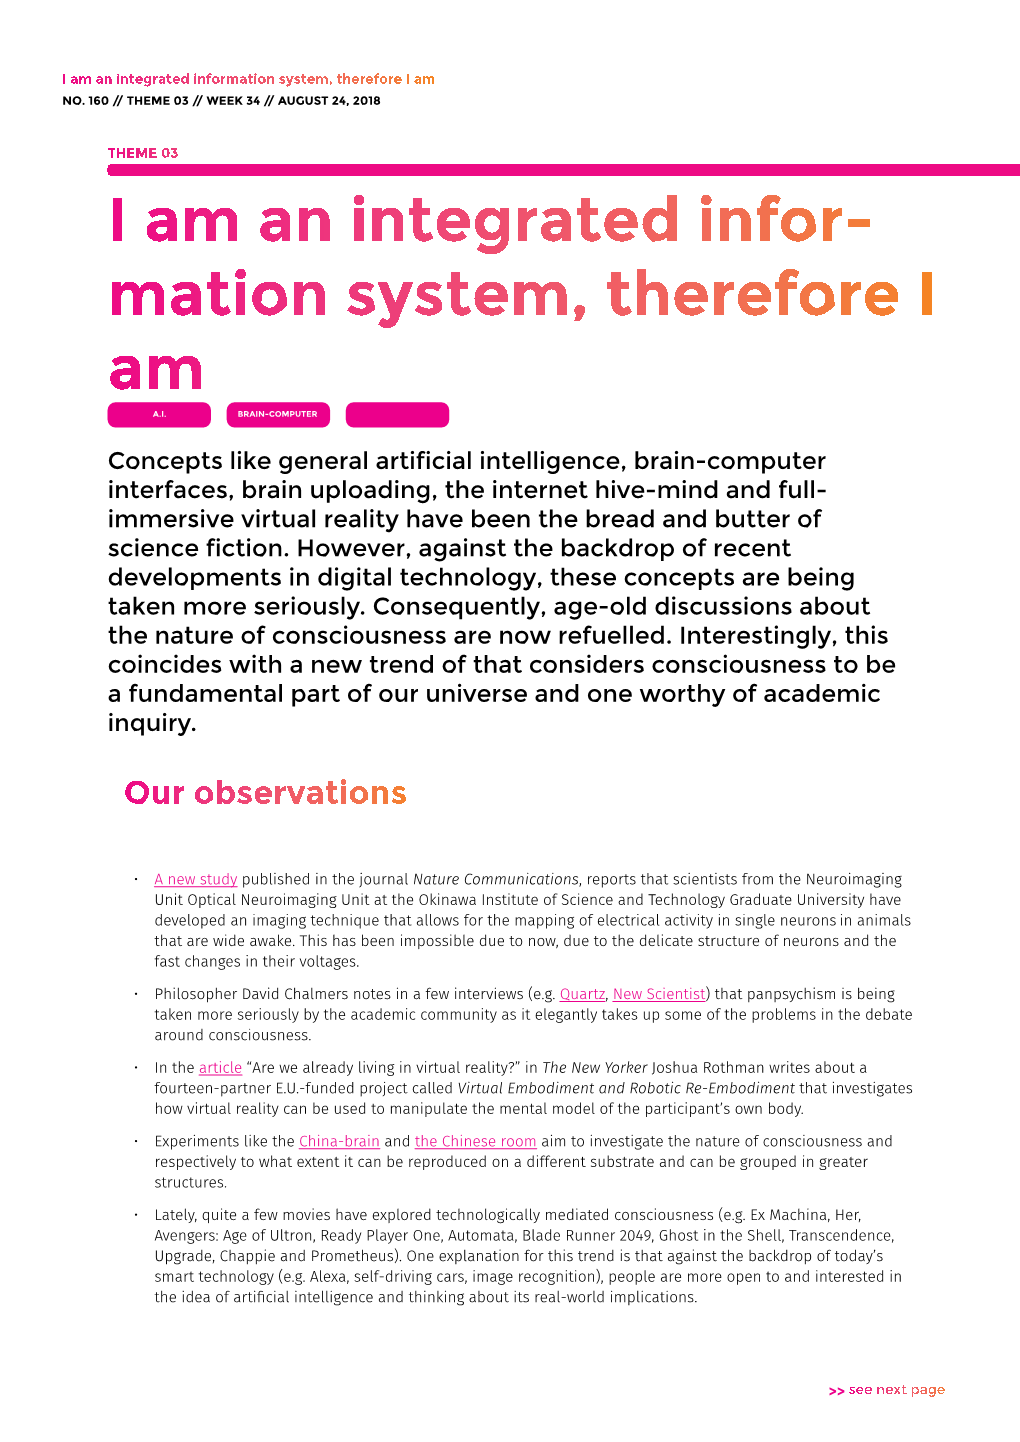 I Am an Integrated Information System, Therefore I Am NO